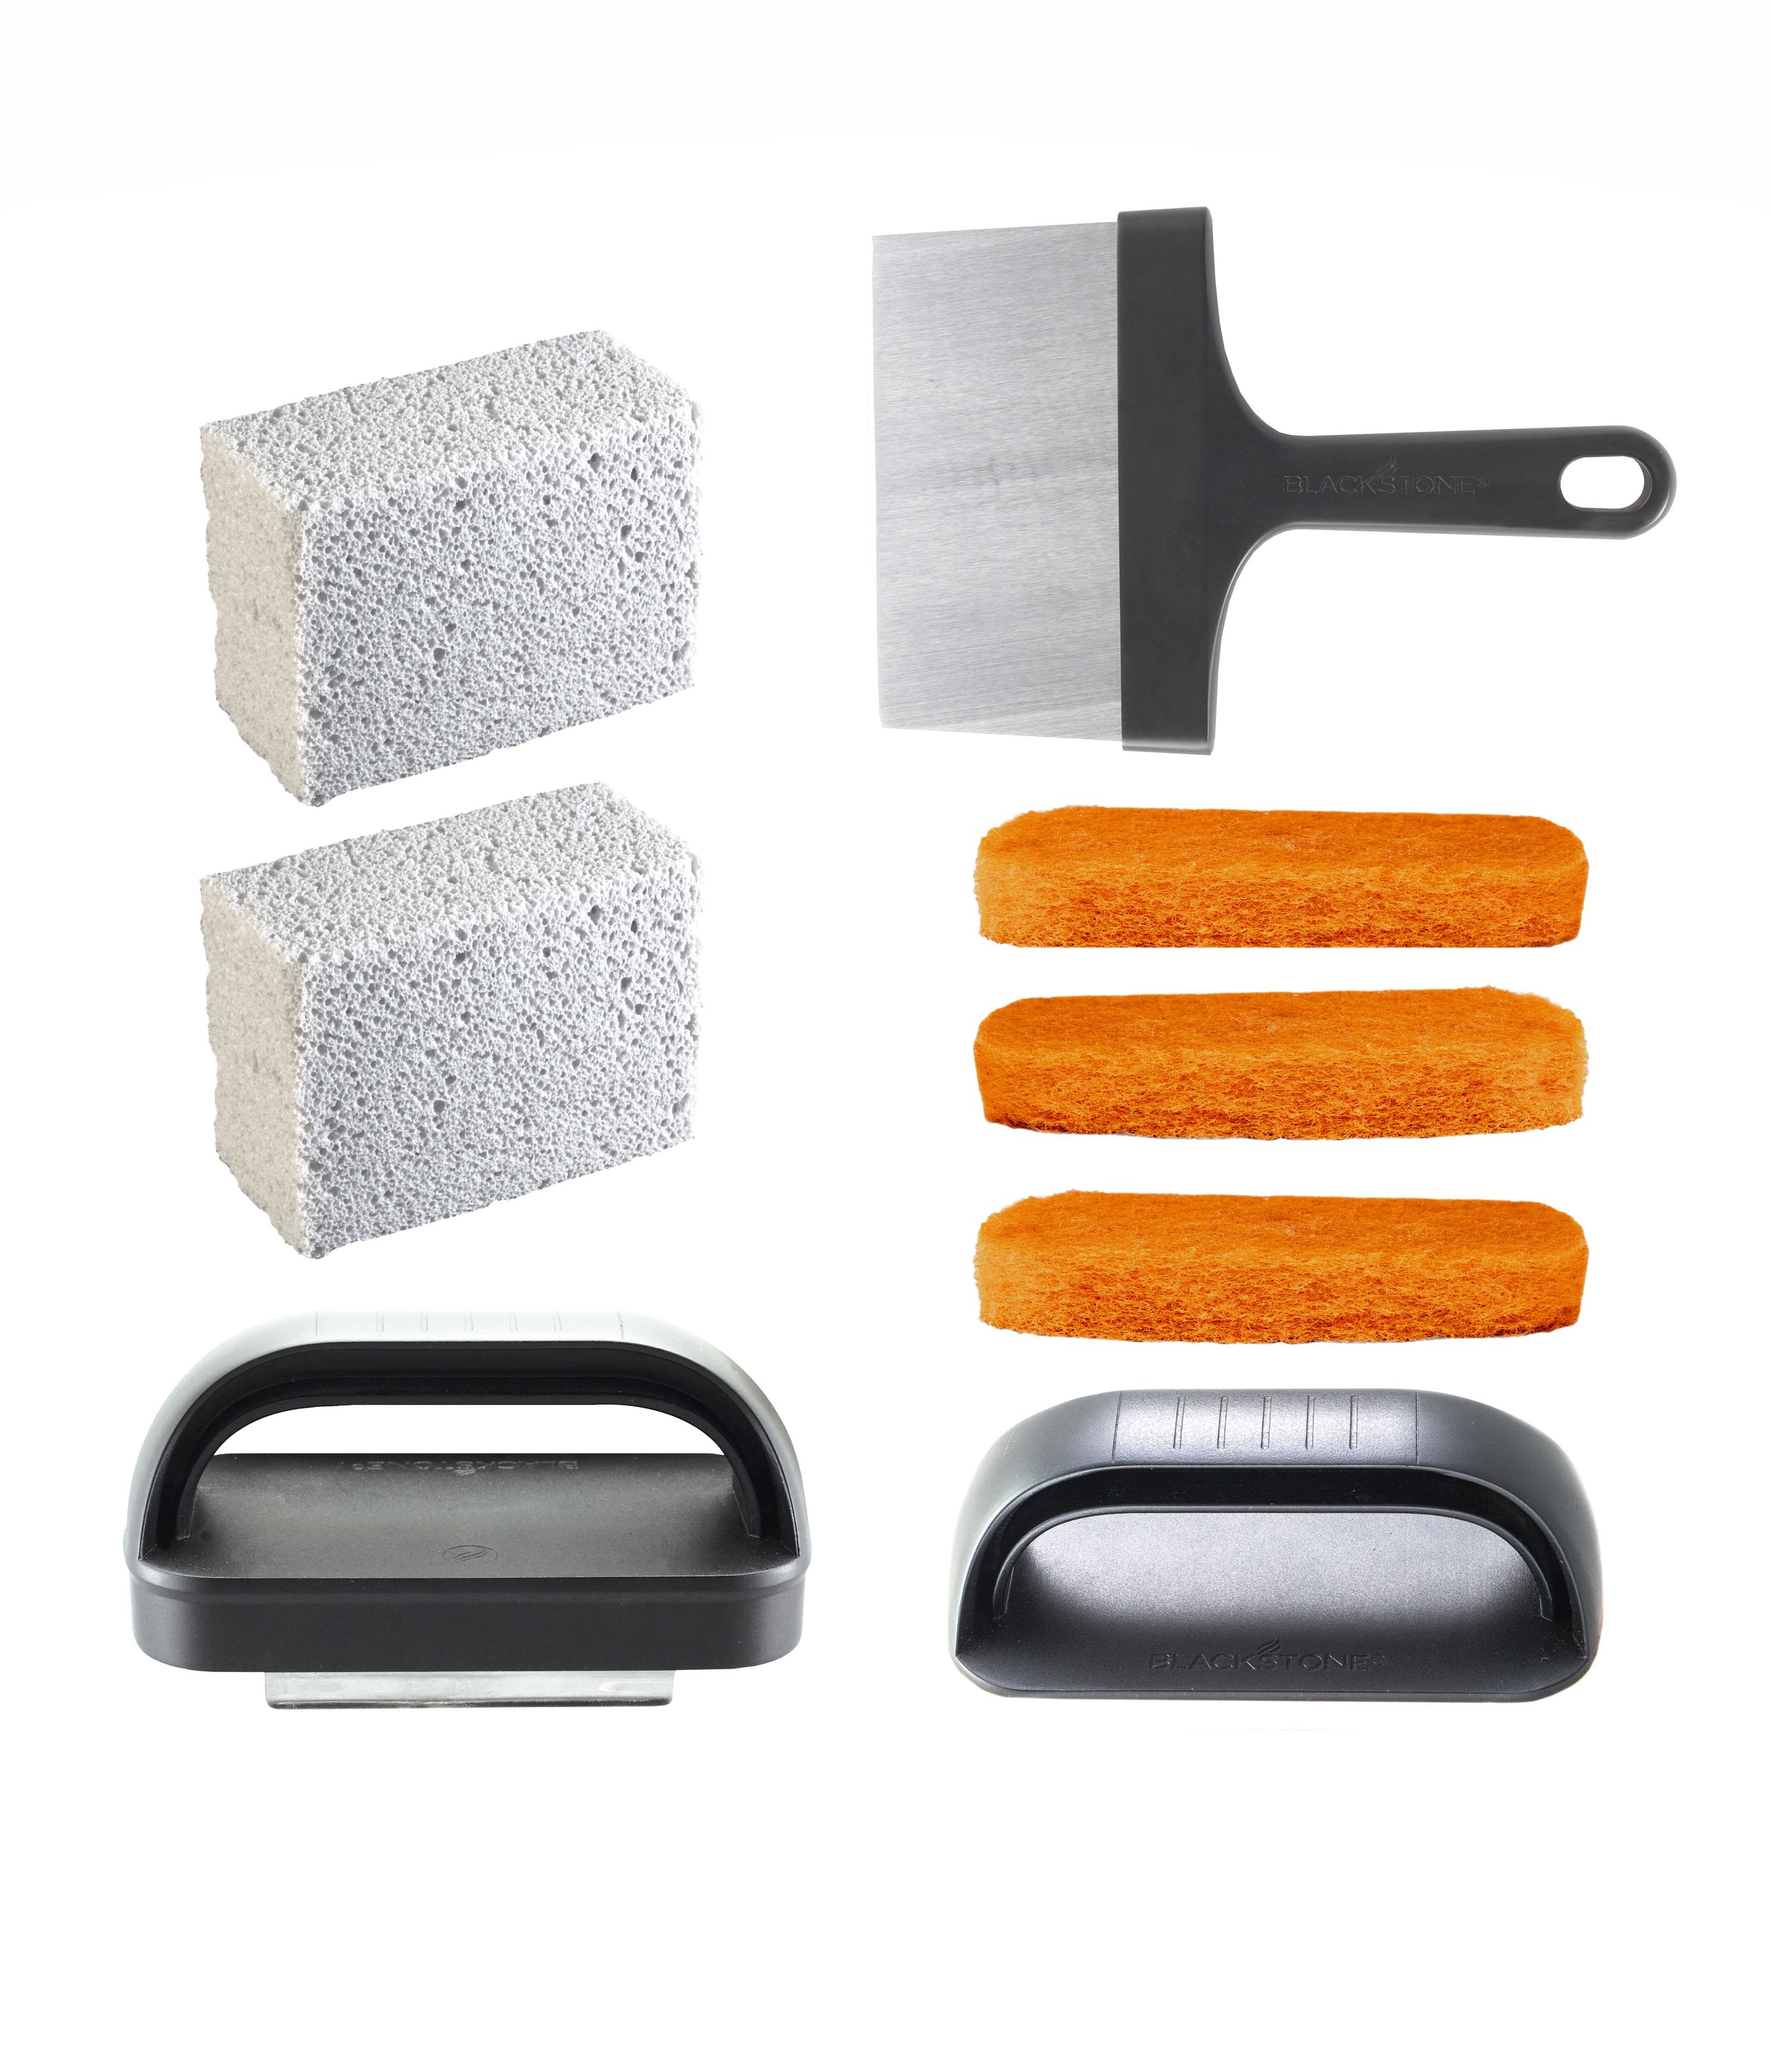 Griddle Cleaning Kit, Flat Top Grill Cleaning Kit Non-scratch